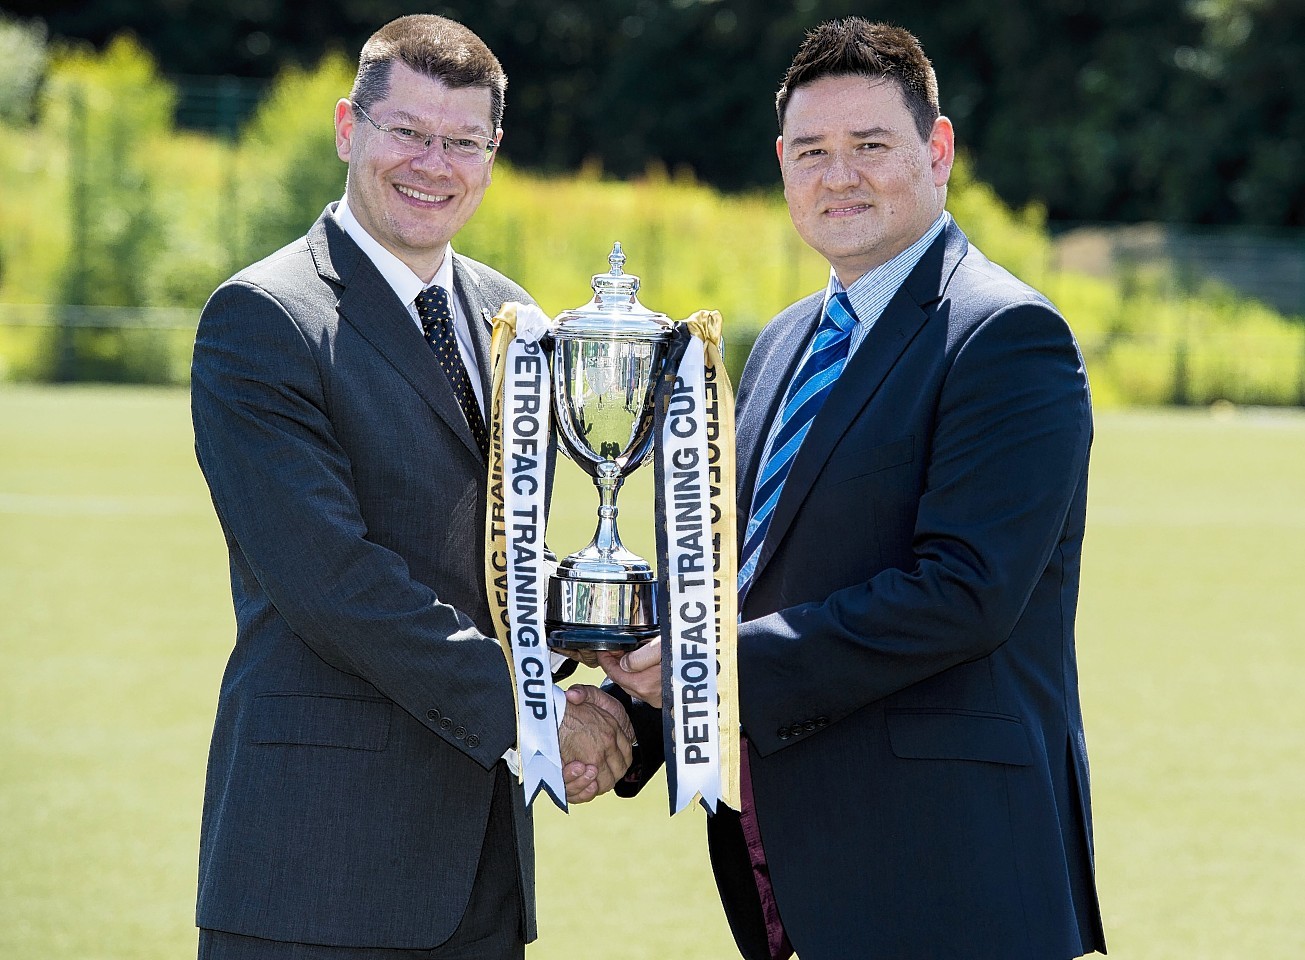 Petrofac have sponsored the Challenge Cup